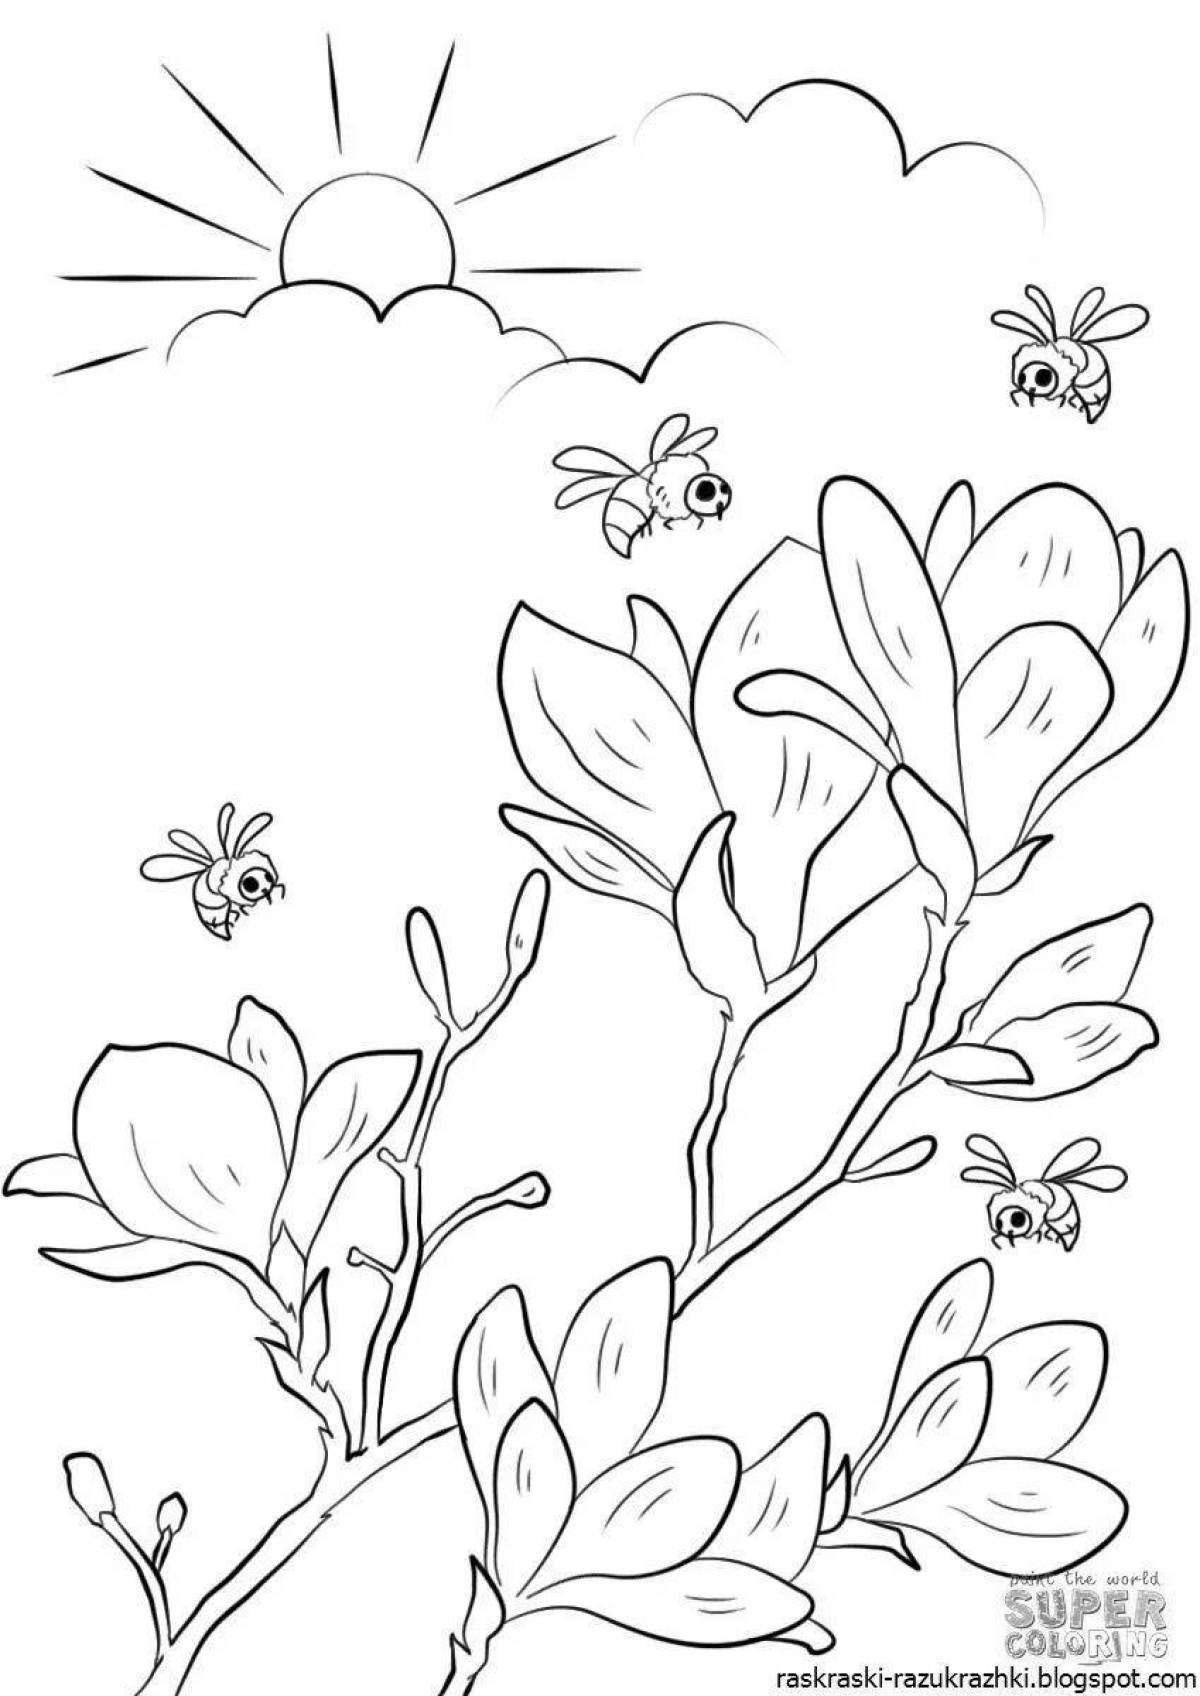 Inviting spring coloring for children 6-7 years old